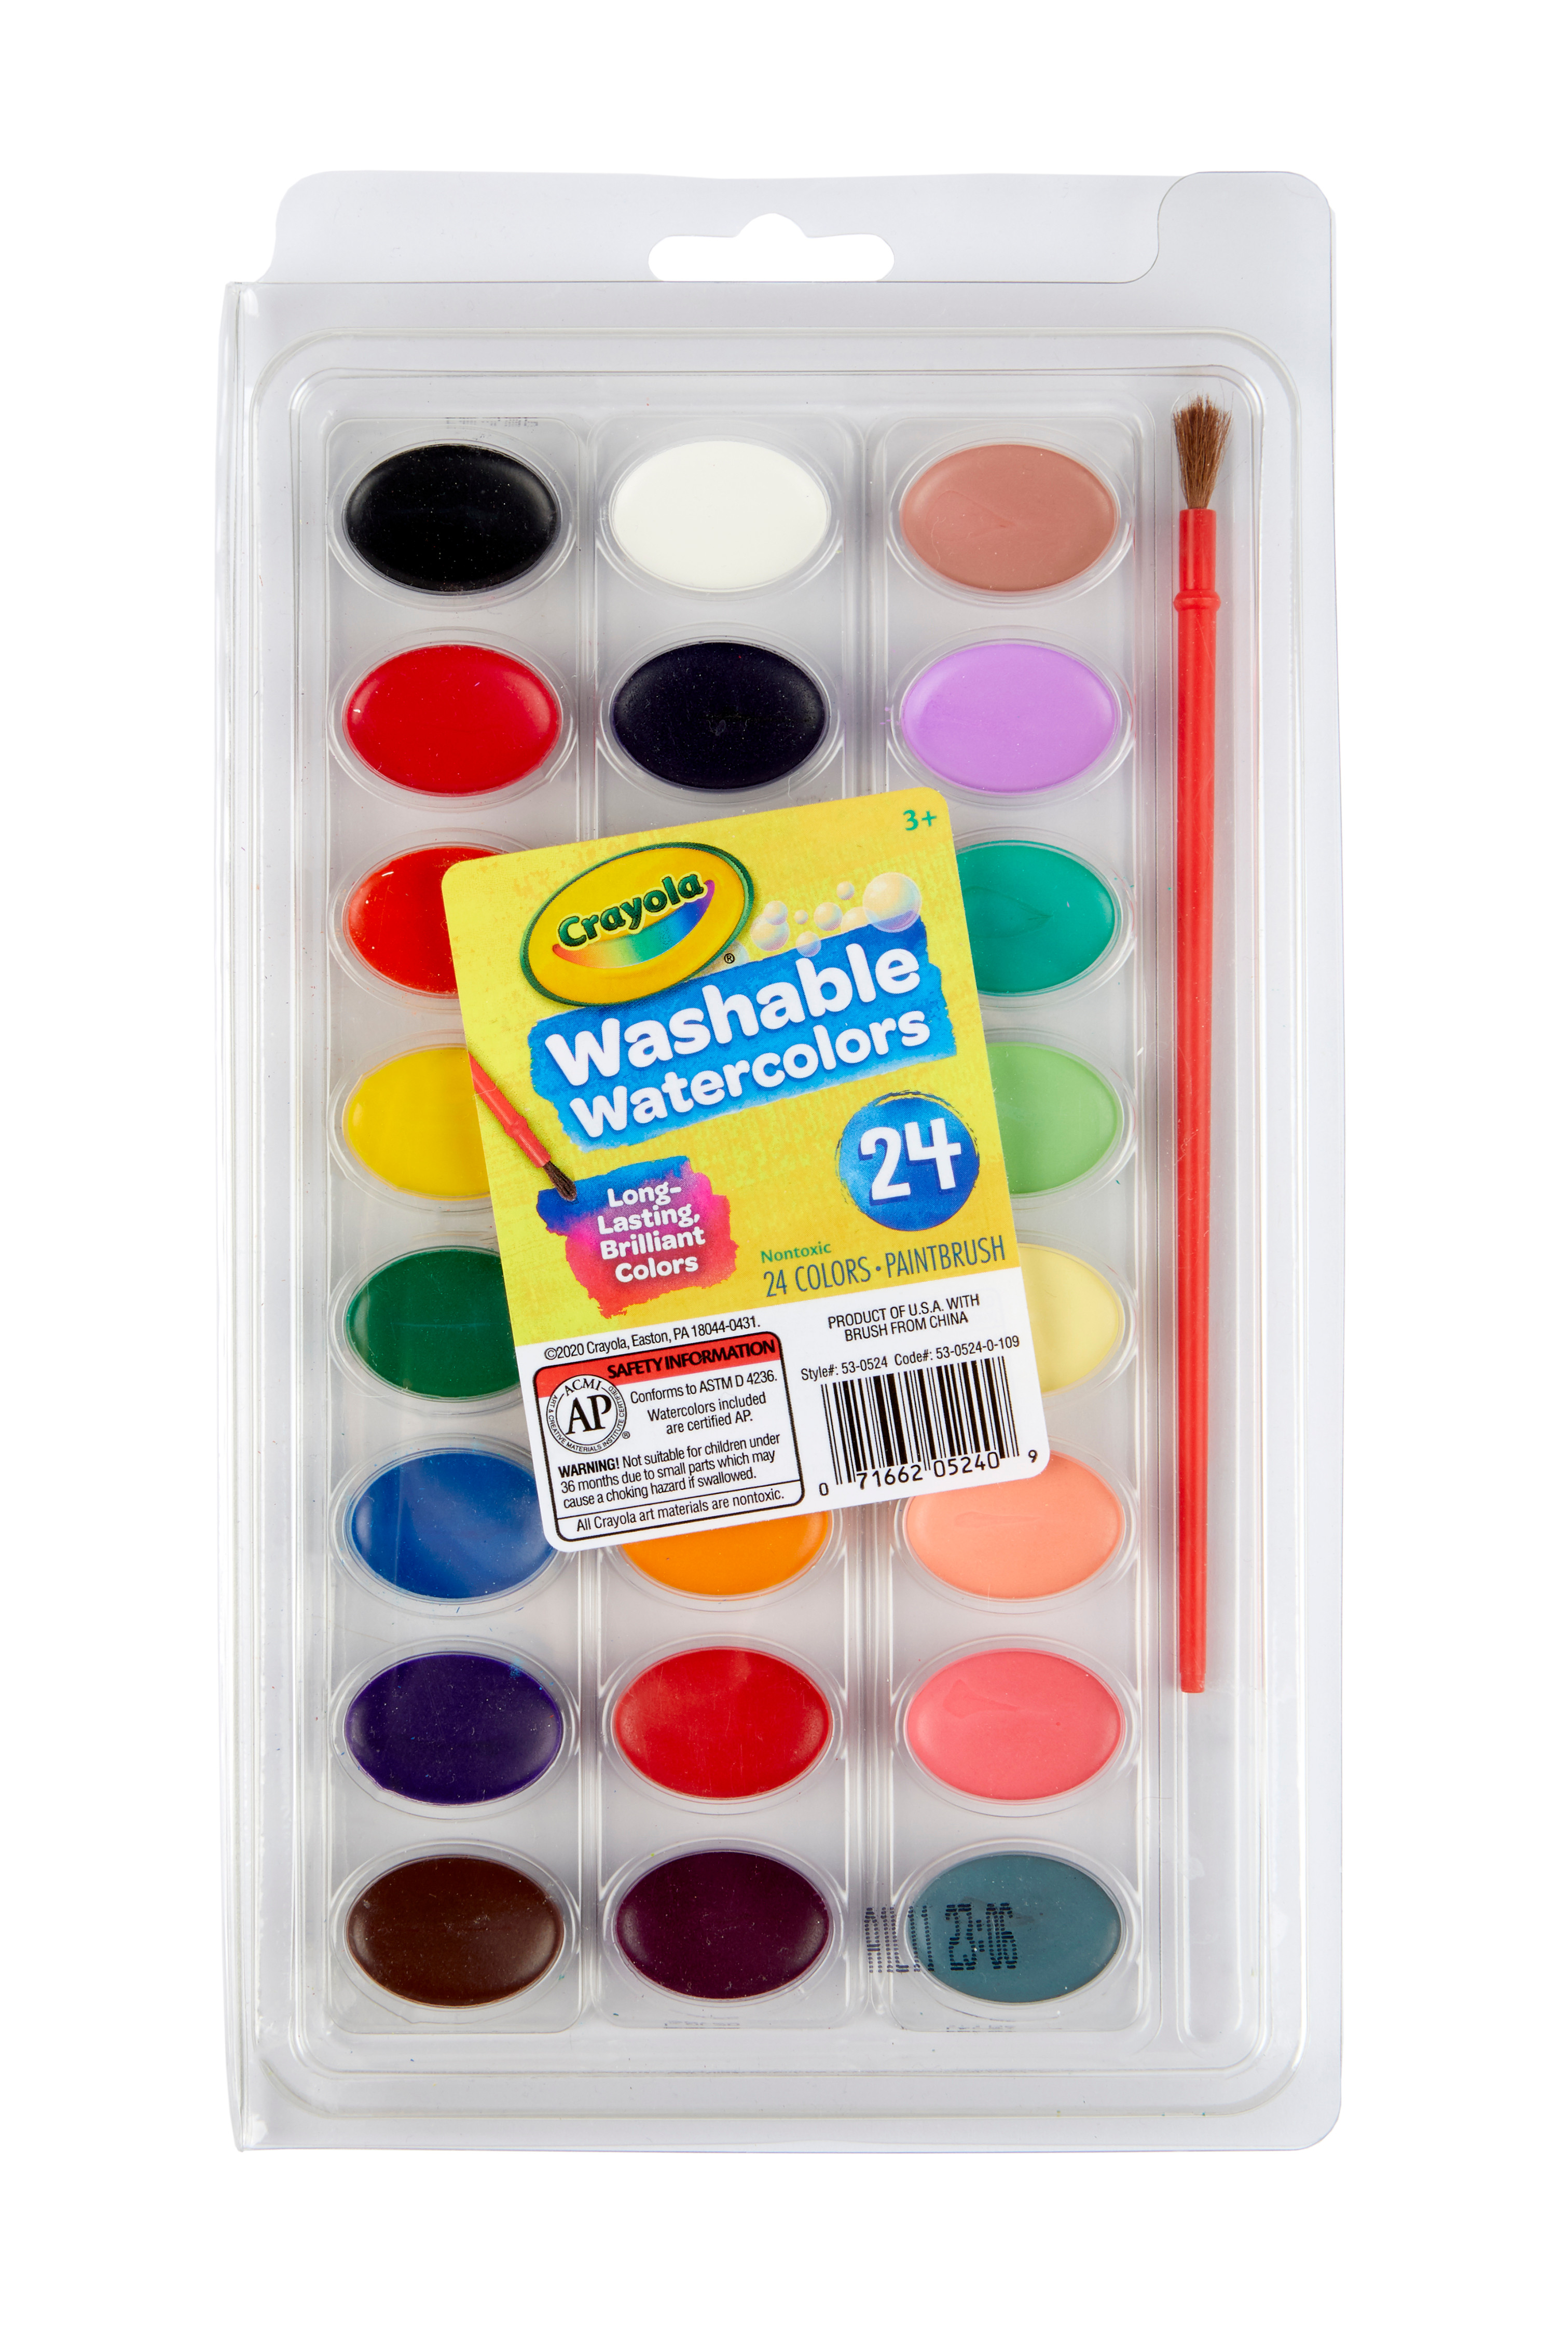 Crayola 24ct Watercolor Paints with Brush - image 1 of 8